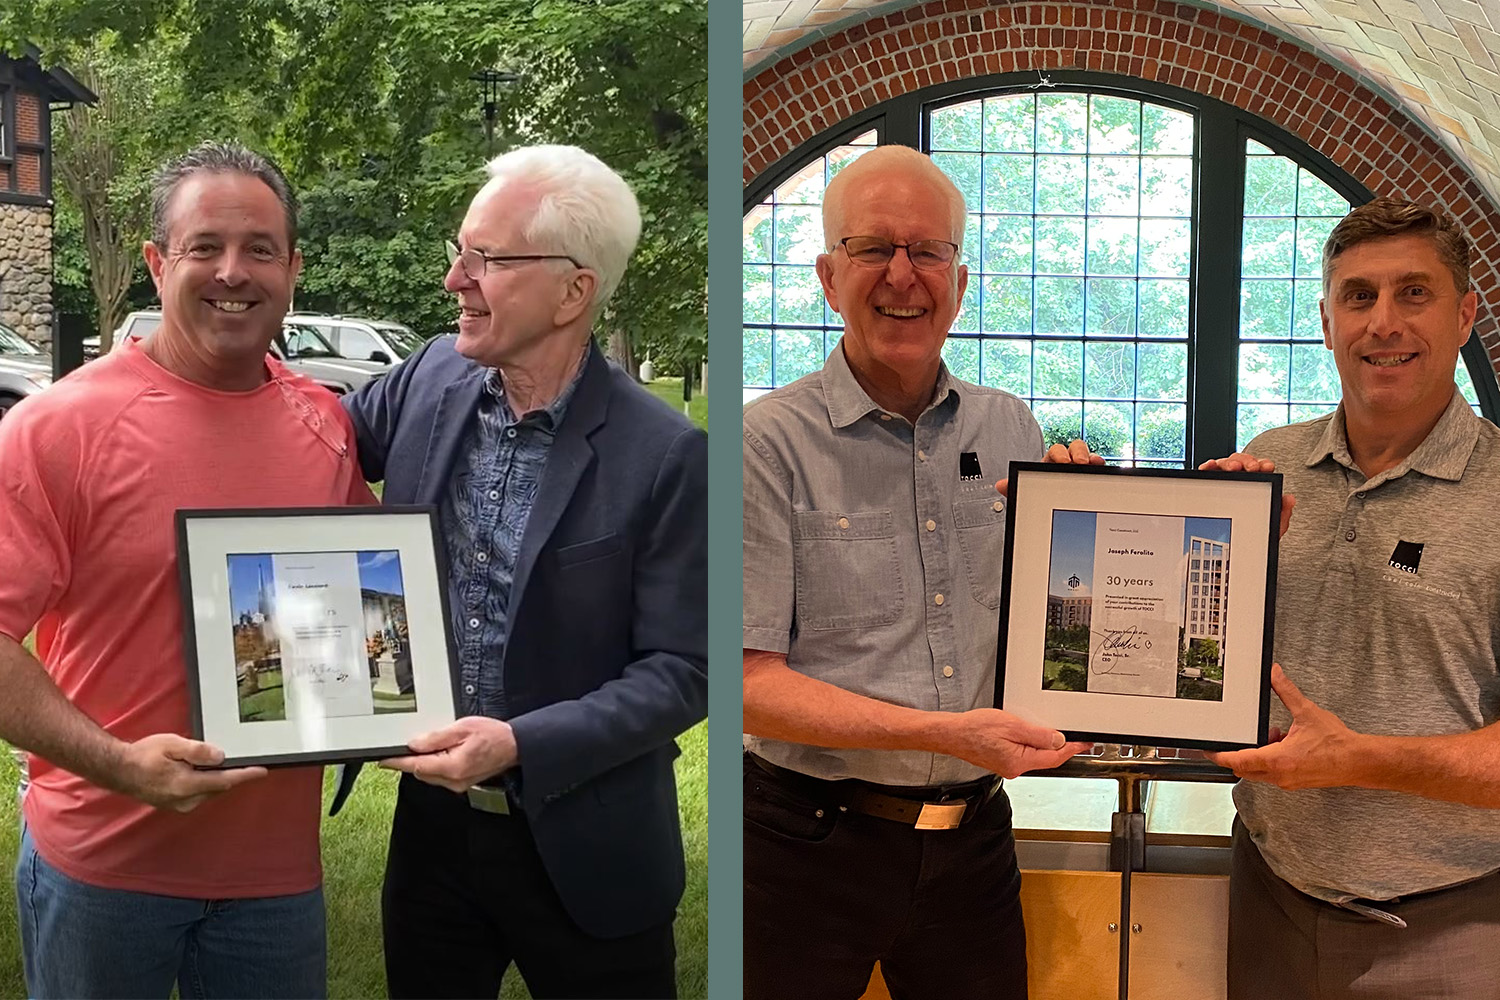 Two images - Kevin Leonard receiving plaque from John Tocci on left, and Joe Ferolito receiving 30th anniversary plaque from John Tocci on right